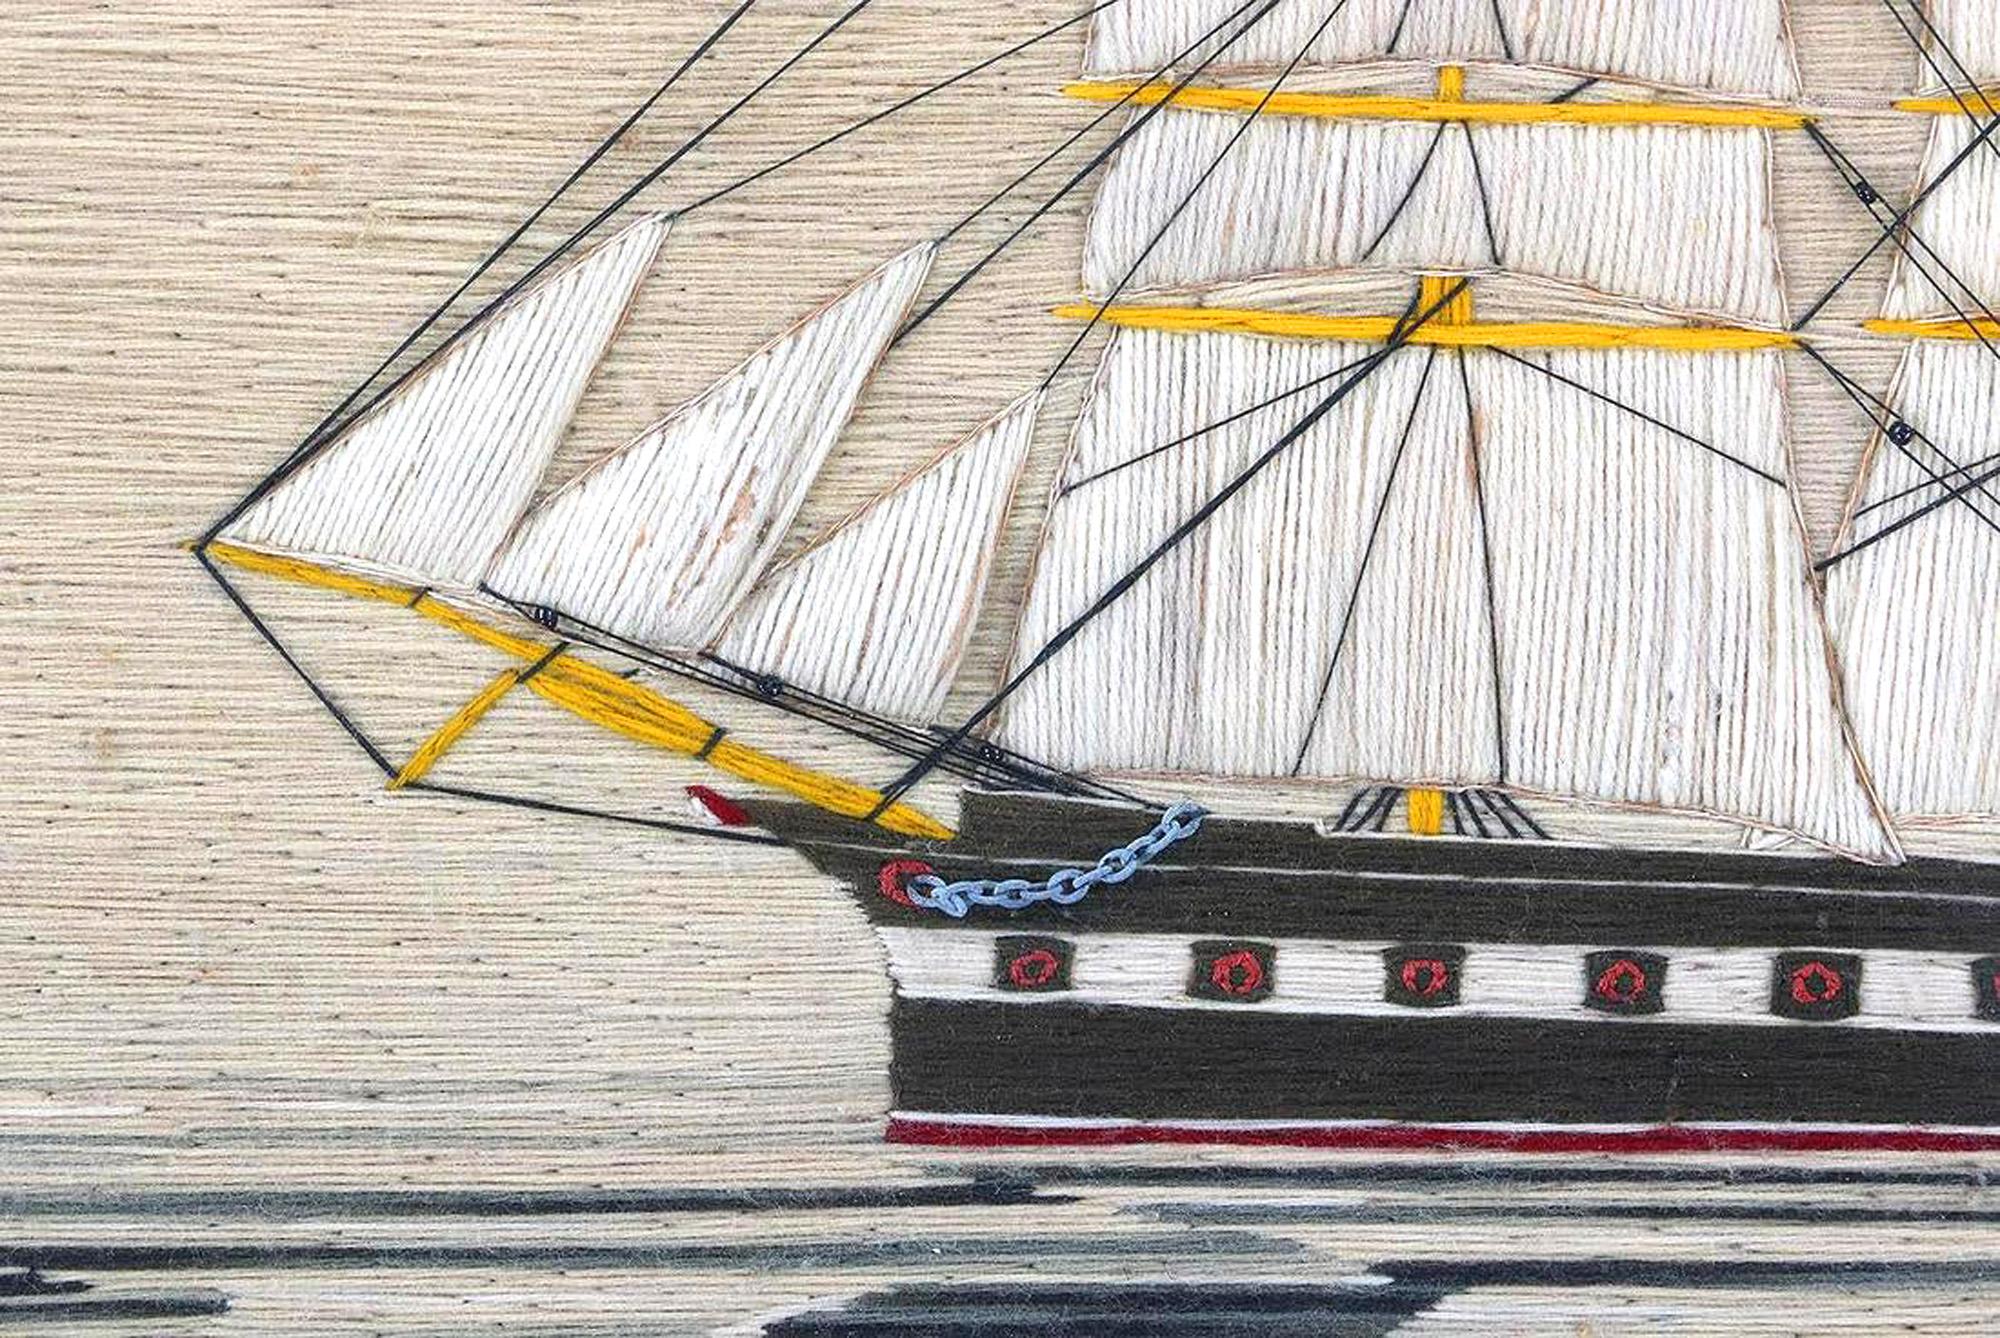 Large British woolwork of three ships including the Ada and two smaller craft,
circa 1875.

The wool depicts three ships- a port side view of The Merchant ship Ada, another sail-ing vessel off her bow with the identification number CY850 on her